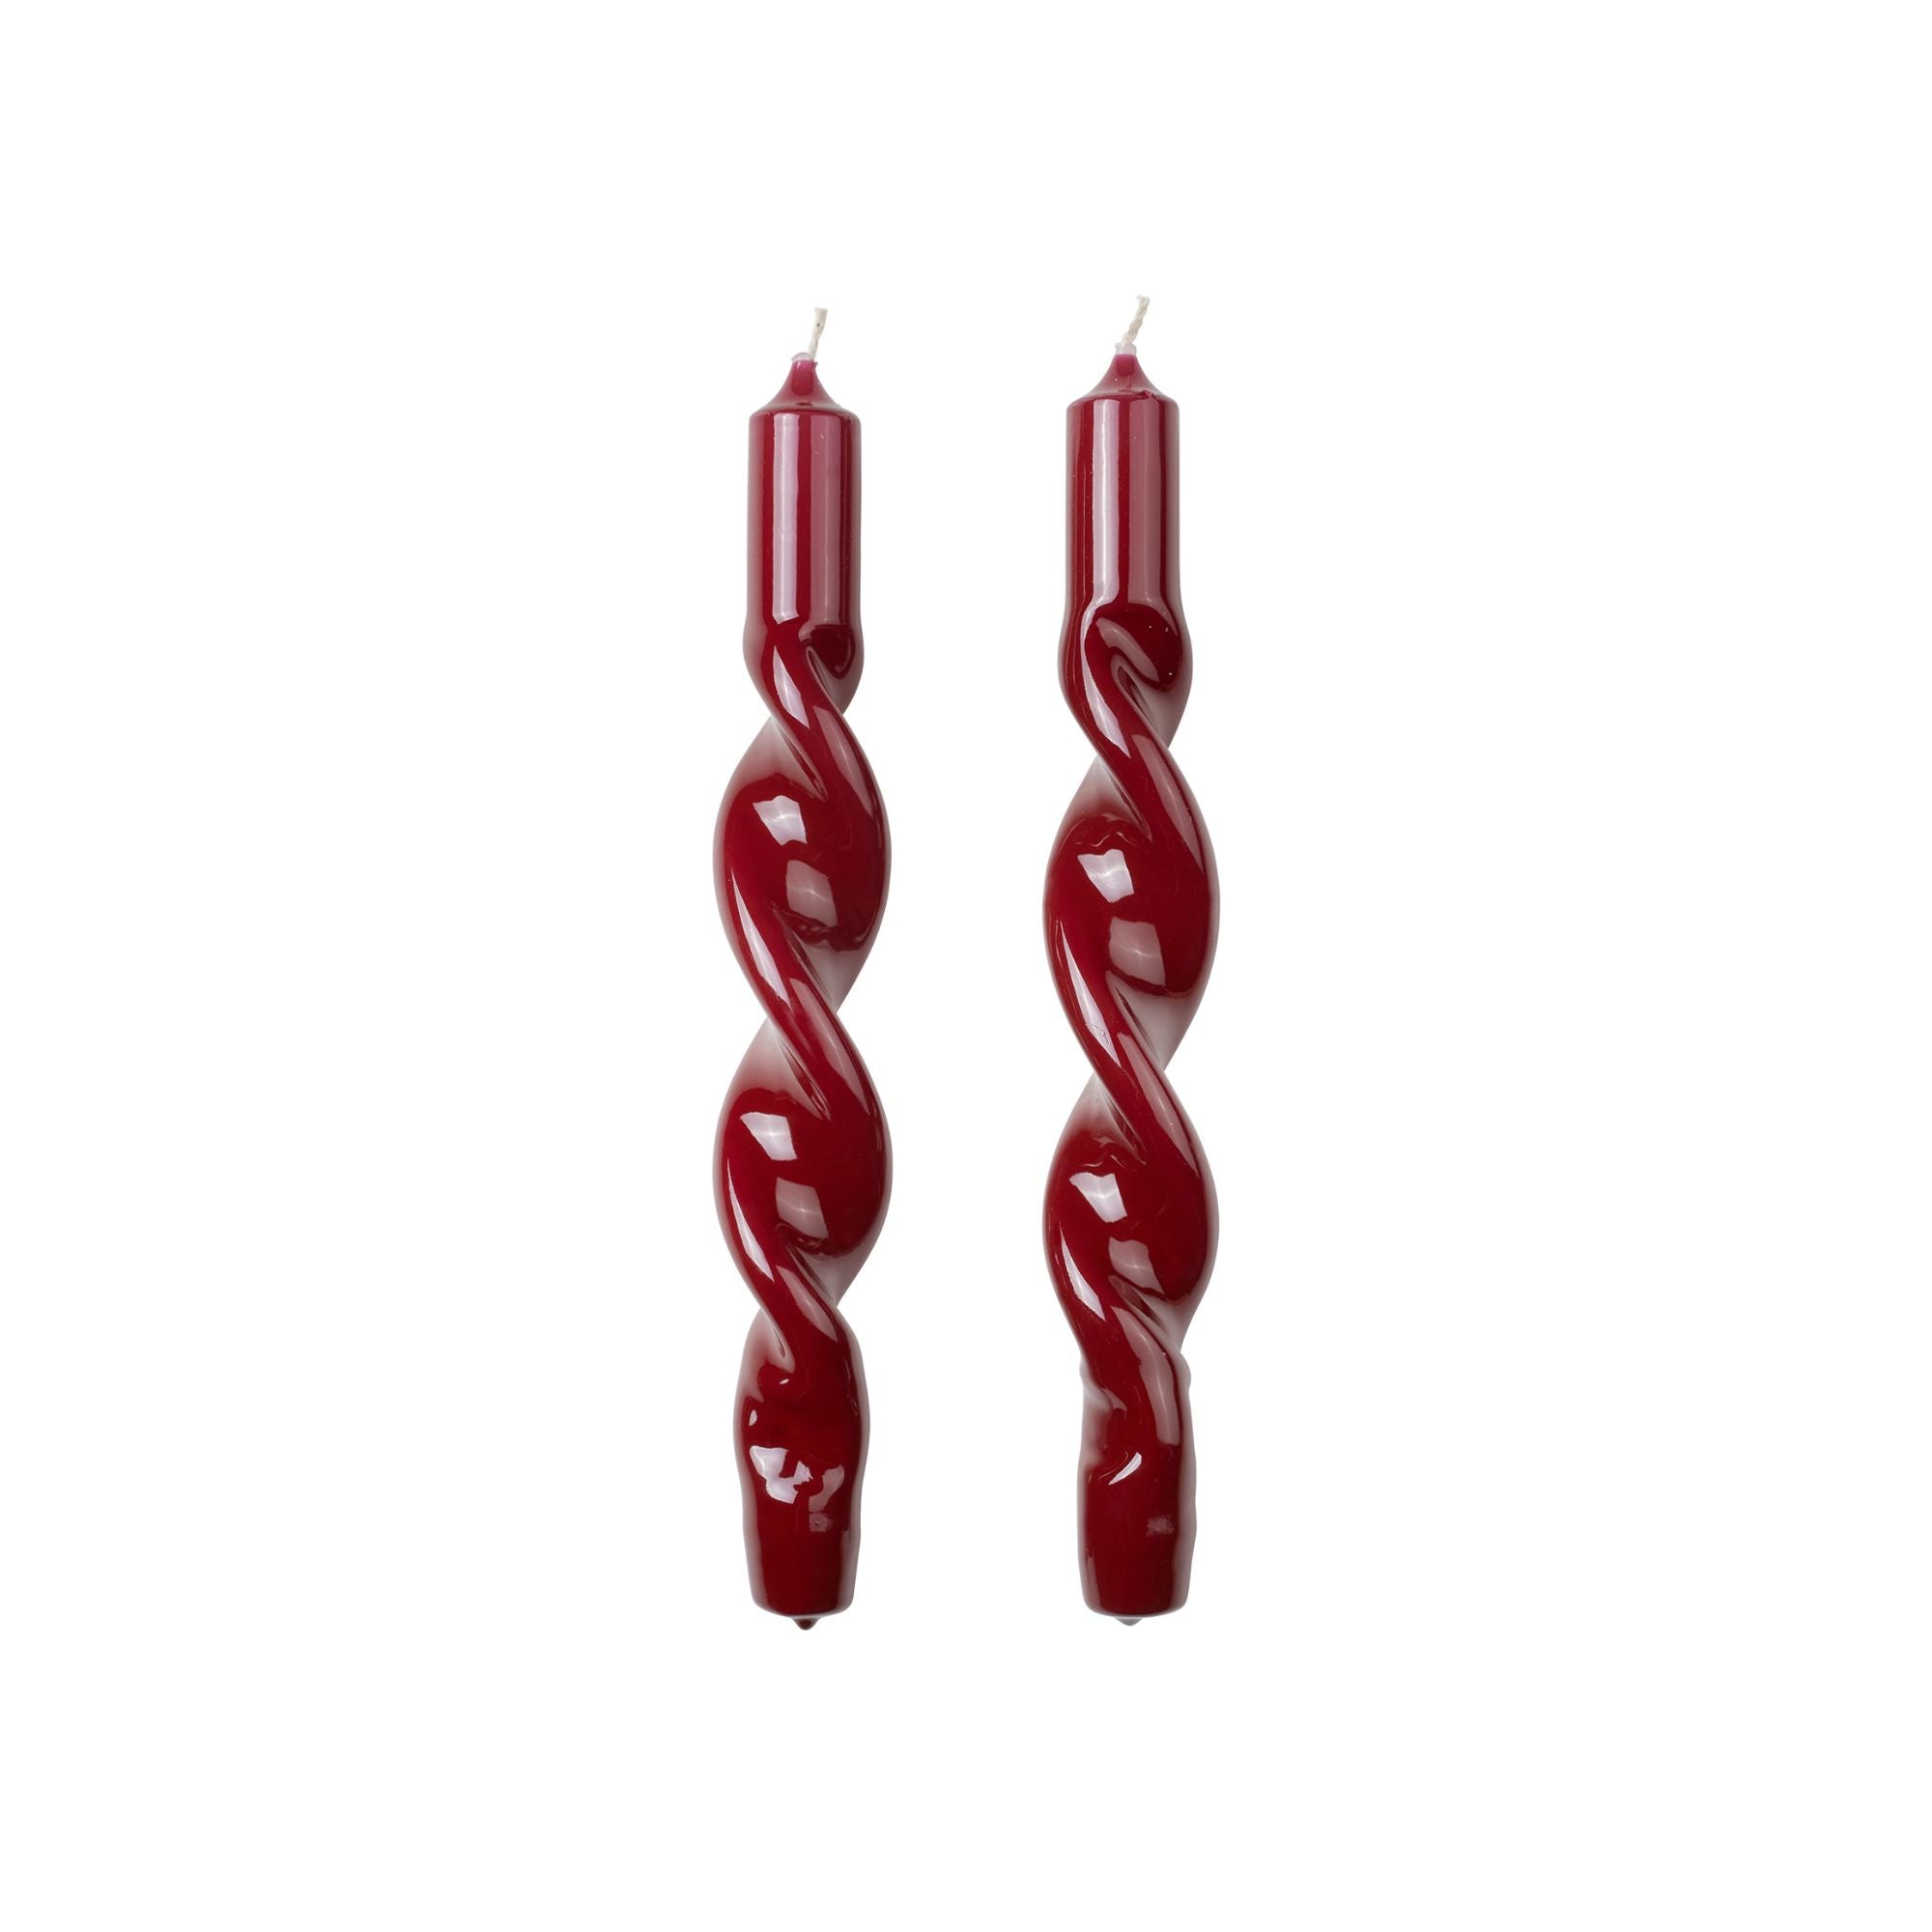 Twist Taper Candle - Set of 2